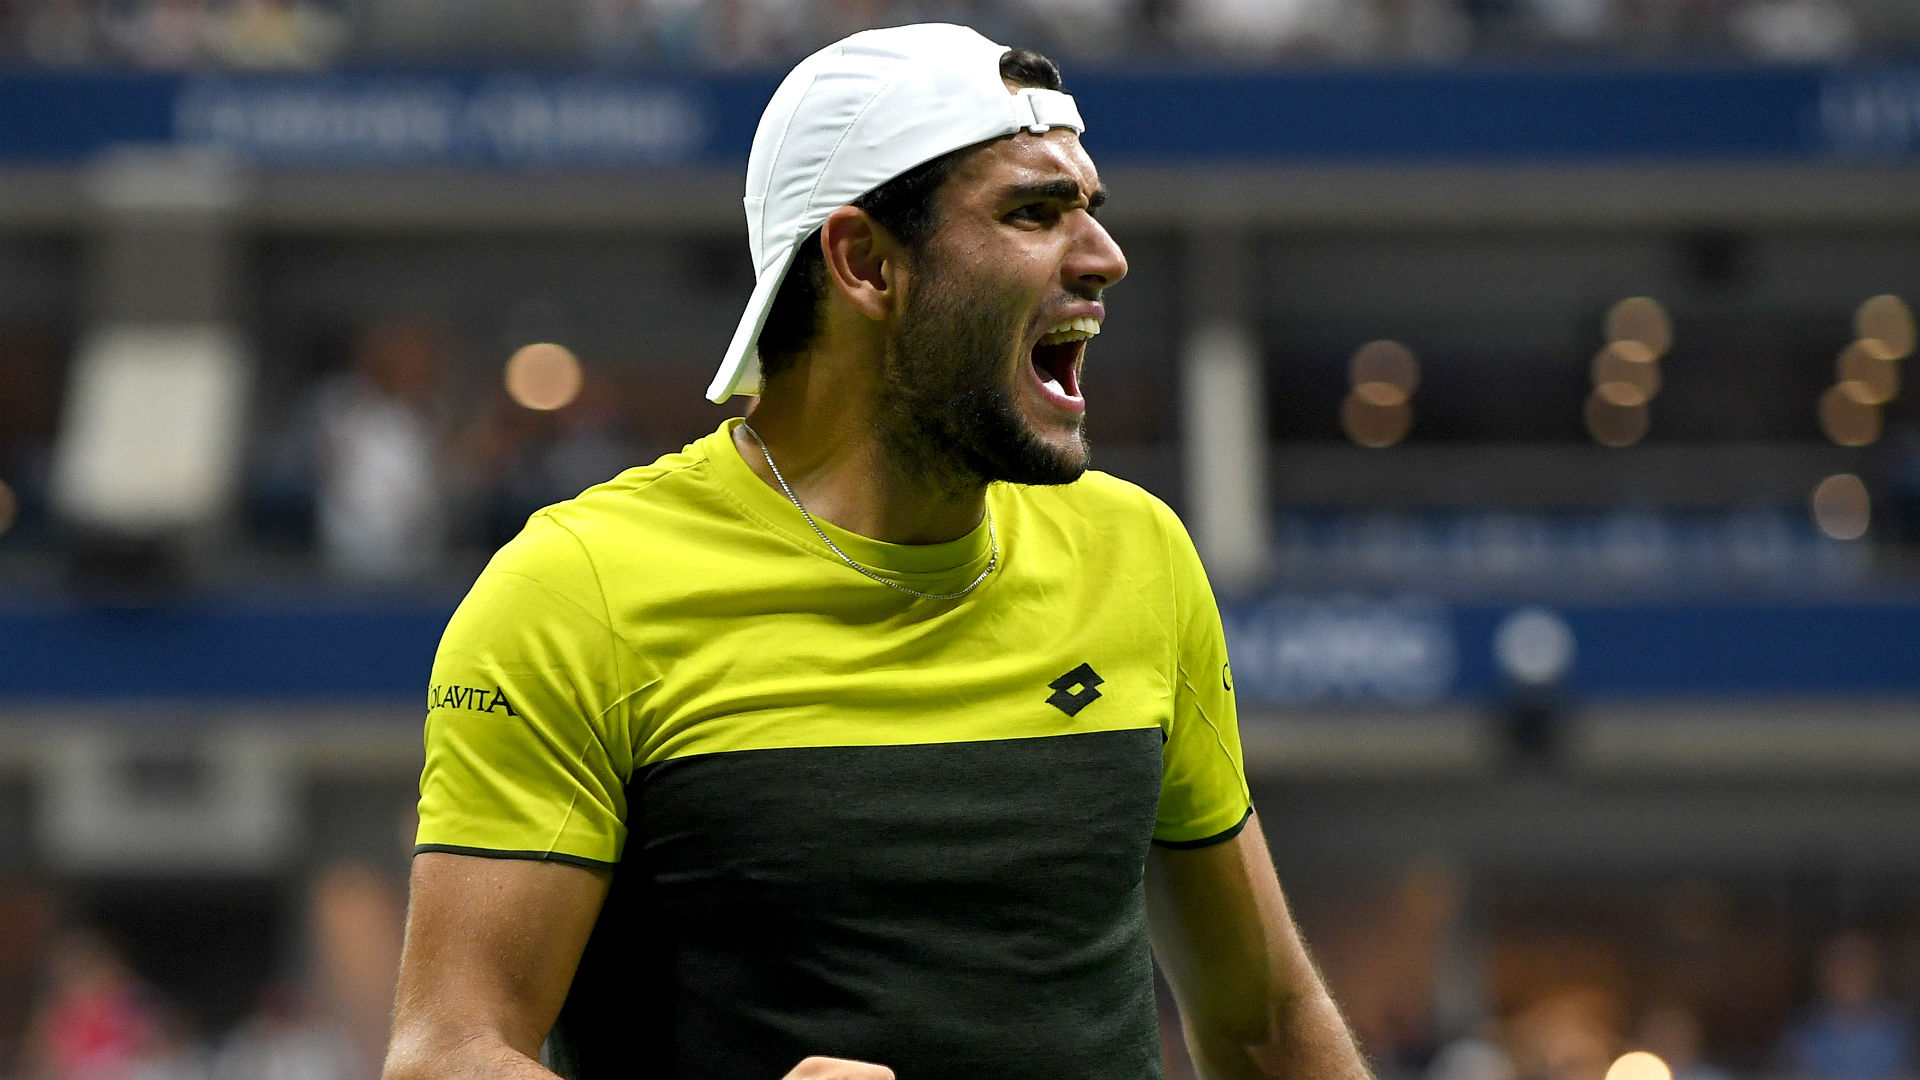 Major Talk 7 Berrettini A Rapid Rise His Mentality And His Love For Roger [ 1080 x 1920 Pixel ]